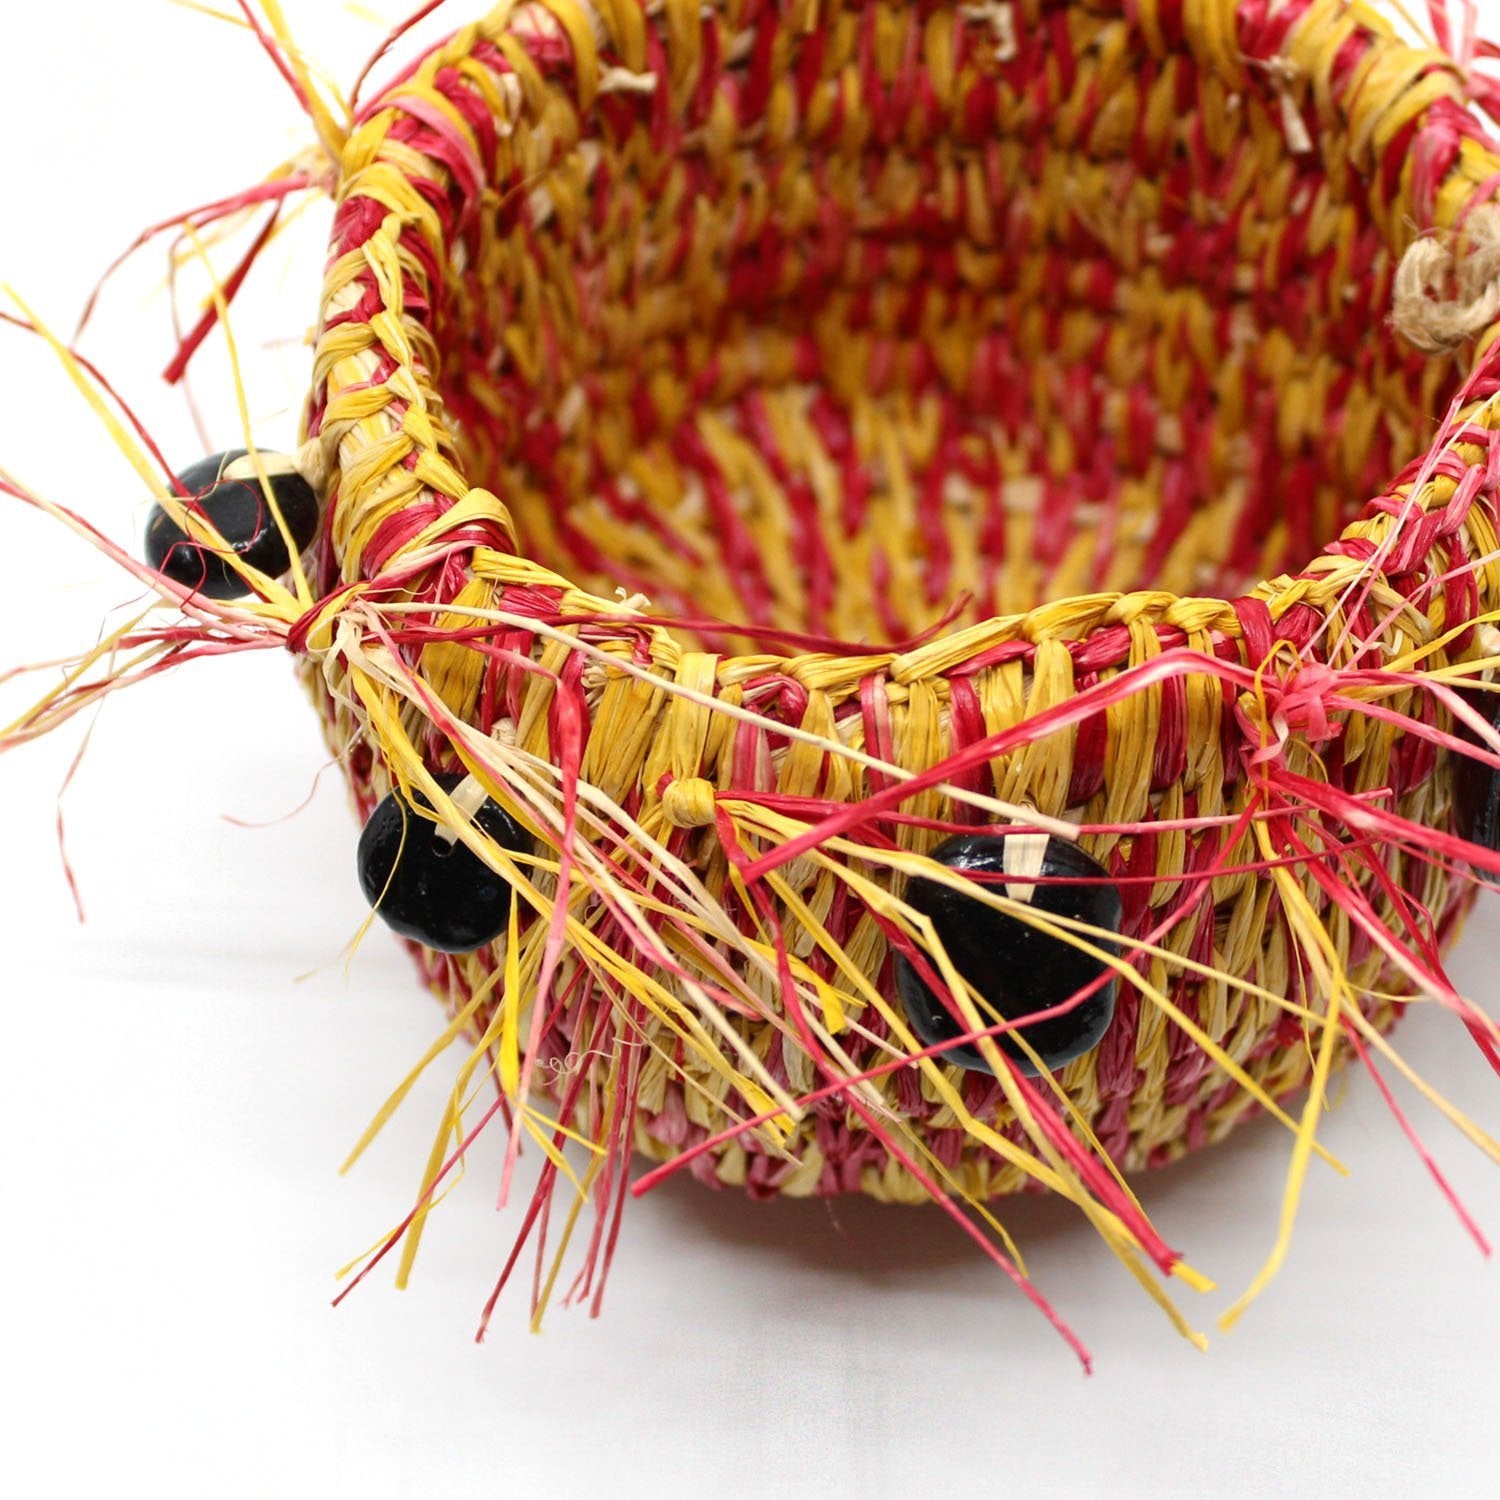 Basket in Reds and Yellows Fibre Art MOA ARTS 